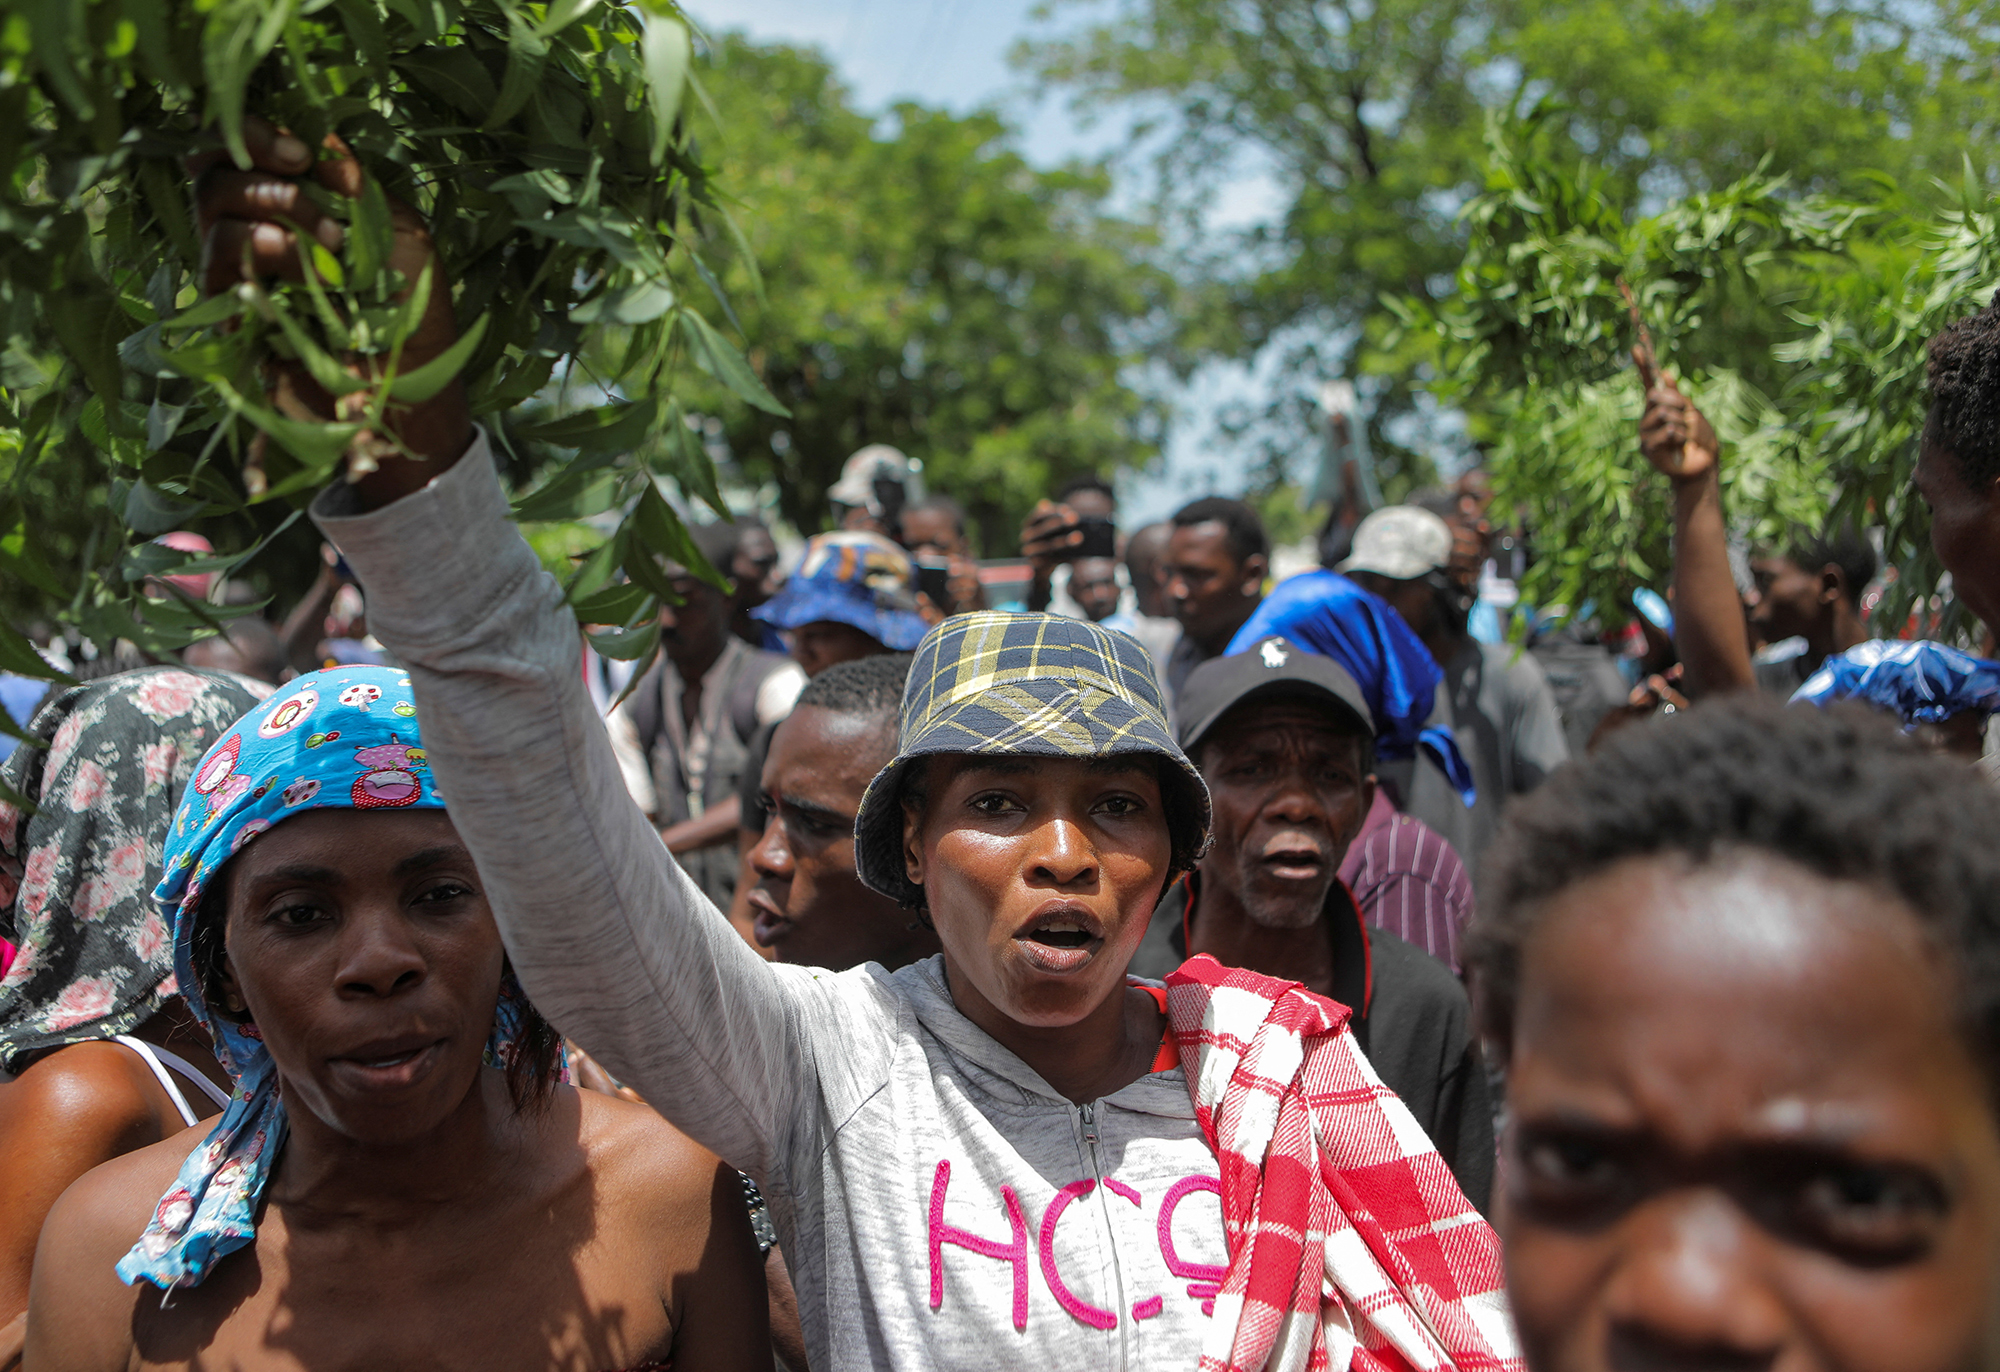 Men and women stand in a group holding green branches over their head as they protest.